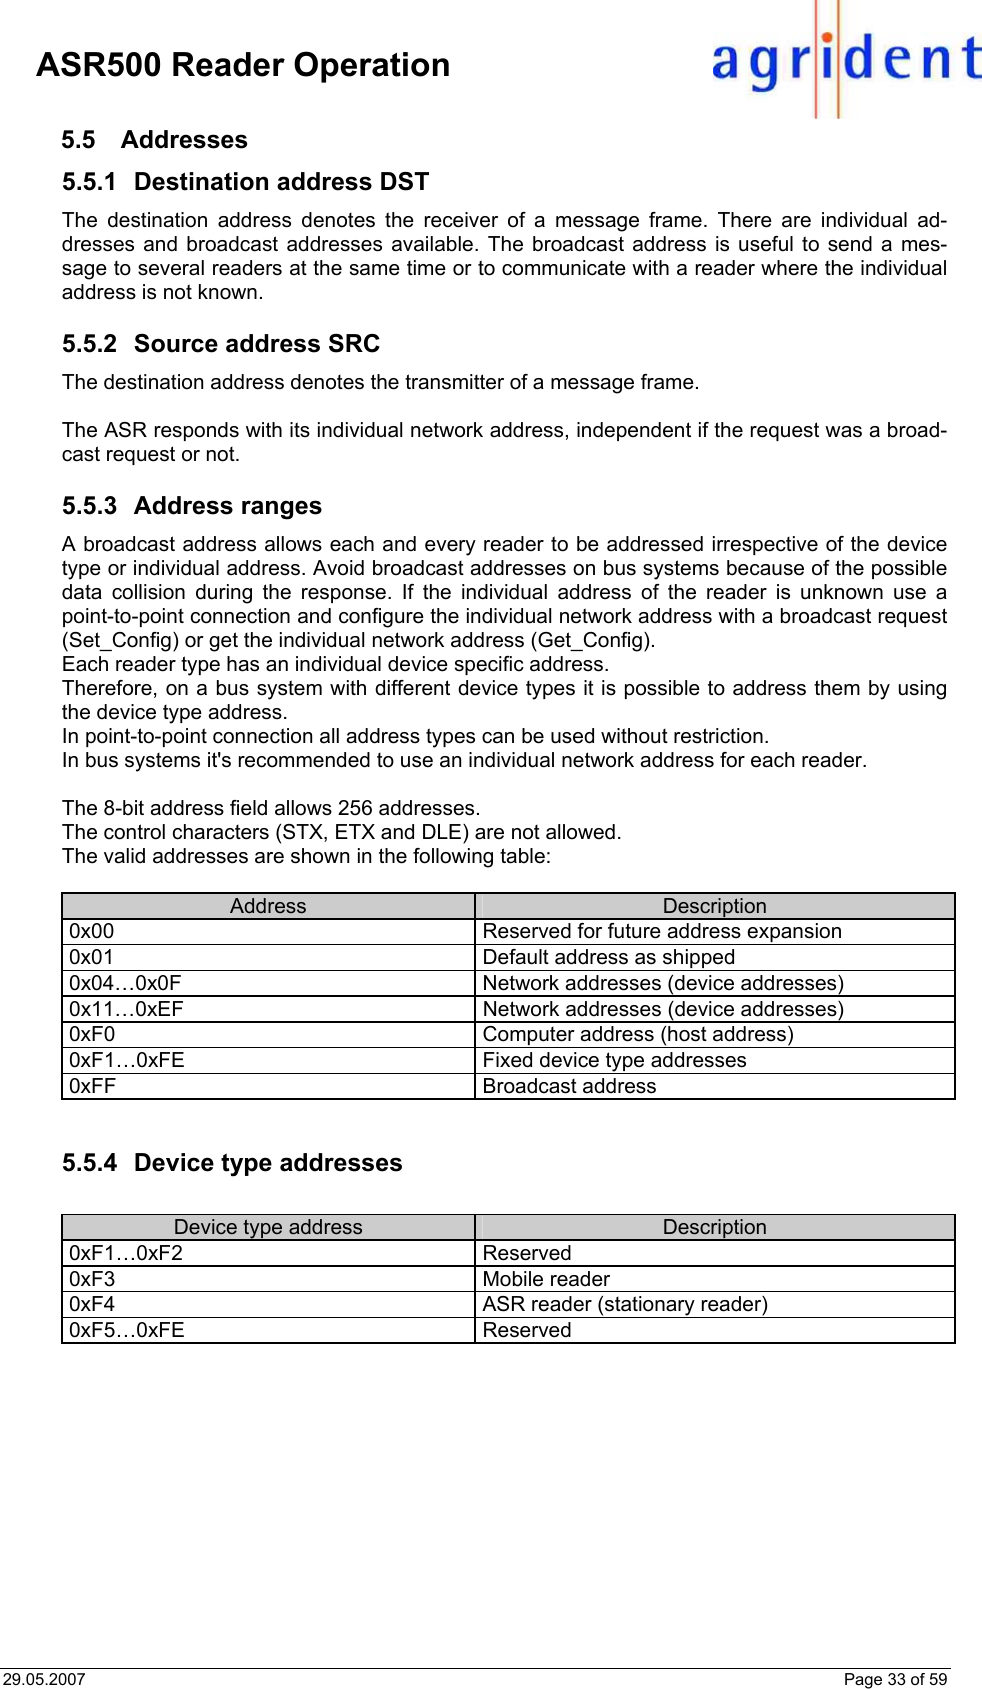 29.05.2007    Page 33 of 59     ASR500 Reader Operation 5.5 Addresses 5.5.1  Destination address DST The destination address denotes the receiver of a message frame. There are individual ad-dresses and broadcast addresses available. The broadcast address is useful to send a mes-sage to several readers at the same time or to communicate with a reader where the individual address is not known.  5.5.2  Source address SRC The destination address denotes the transmitter of a message frame.  The ASR responds with its individual network address, independent if the request was a broad-cast request or not.   5.5.3 Address ranges A broadcast address allows each and every reader to be addressed irrespective of the device type or individual address. Avoid broadcast addresses on bus systems because of the possible data collision during the response. If the individual address of the reader is unknown use a point-to-point connection and configure the individual network address with a broadcast request (Set_Config) or get the individual network address (Get_Config). Each reader type has an individual device specific address. Therefore, on a bus system with different device types it is possible to address them by using the device type address. In point-to-point connection all address types can be used without restriction. In bus systems it&apos;s recommended to use an individual network address for each reader.  The 8-bit address field allows 256 addresses. The control characters (STX, ETX and DLE) are not allowed. The valid addresses are shown in the following table:  Address  Description 0x00  Reserved for future address expansion 0x01  Default address as shipped 0x04…0x0F  Network addresses (device addresses) 0x11…0xEF  Network addresses (device addresses) 0xF0  Computer address (host address) 0xF1…0xFE  Fixed device type addresses 0xFF Broadcast address   5.5.4  Device type addresses  Device type address  Description 0xF1…0xF2 Reserved 0xF3 Mobile reader 0xF4  ASR reader (stationary reader) 0xF5…0xFE Reserved  